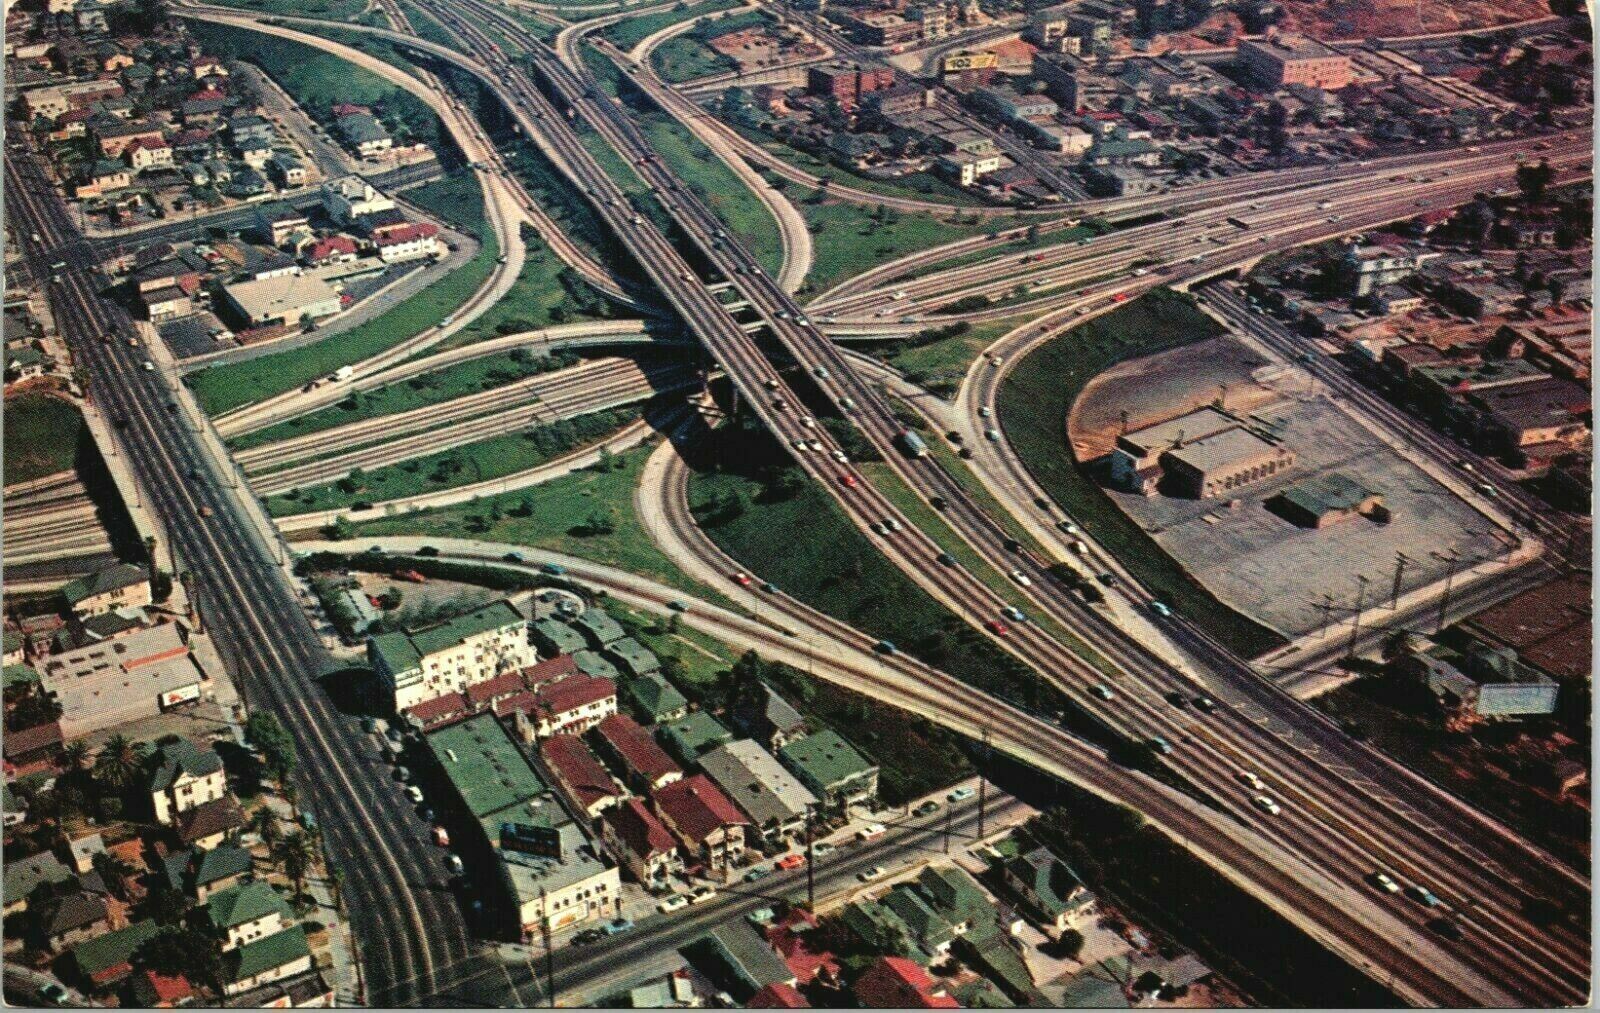 Los Angeles Freeway System Showing Downtown Los Angeles California 1950s